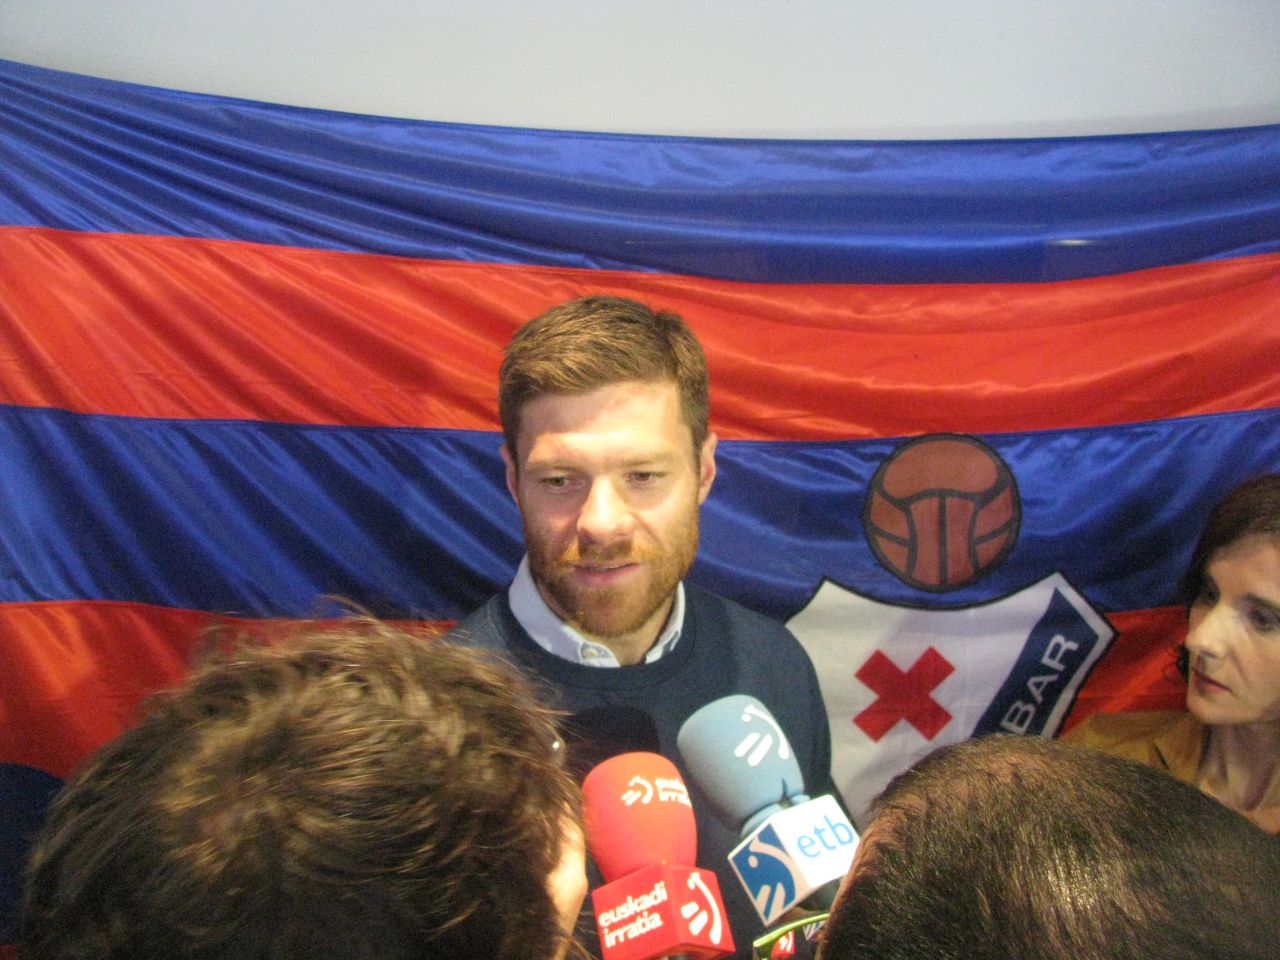 Former Eibar player Xabi Alonso is among those backing the club's bid for promotion. 